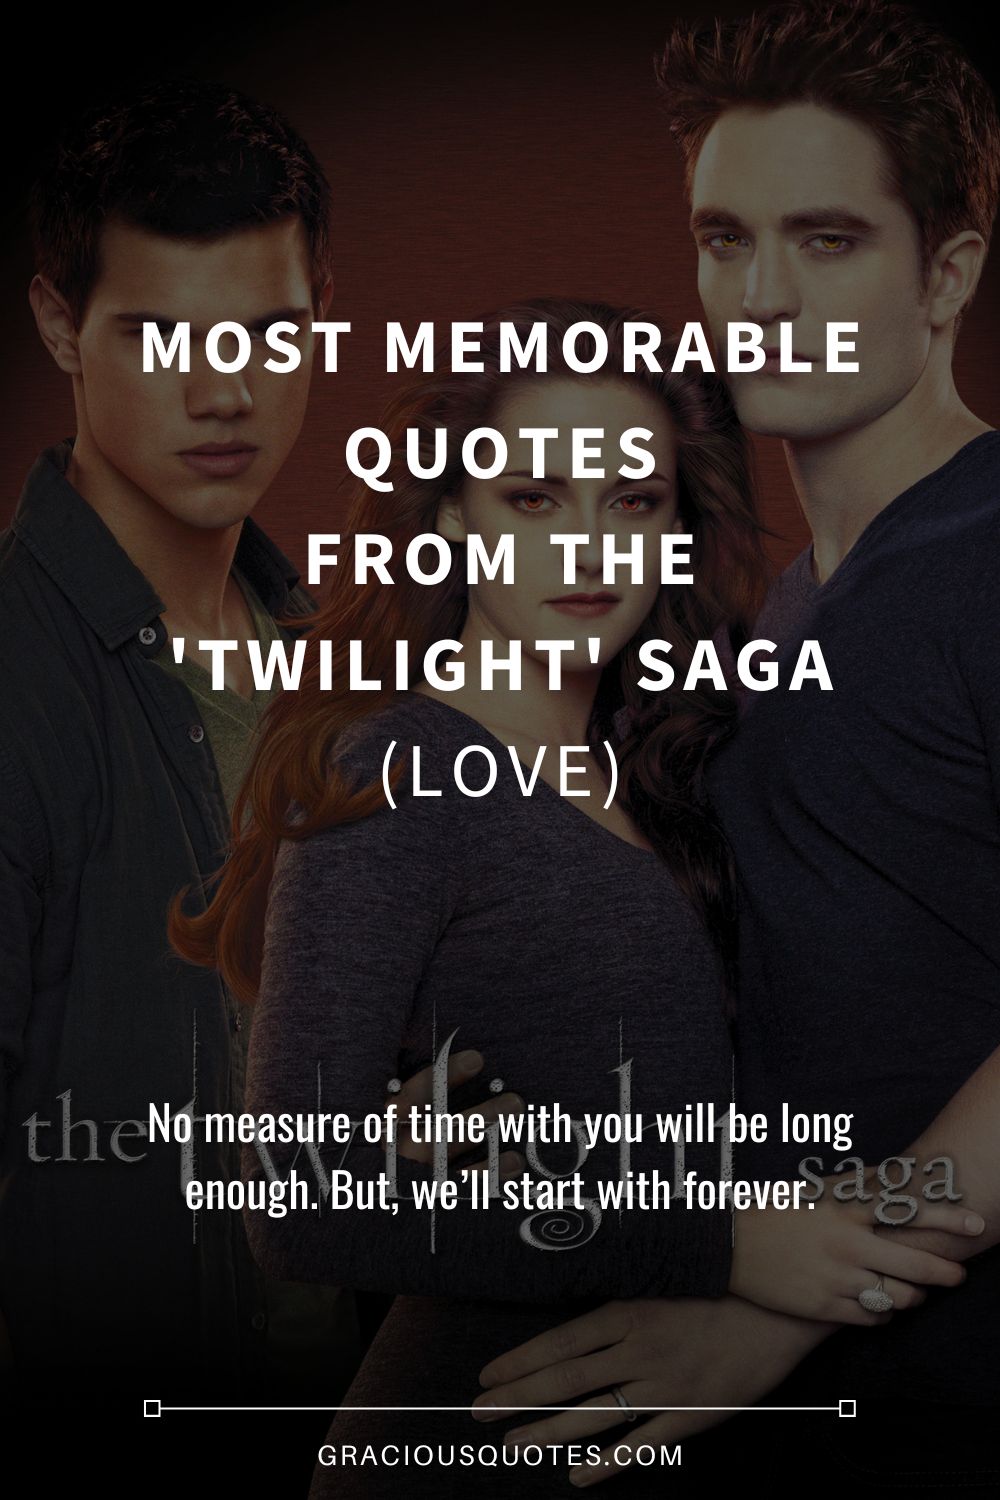 91 Most Memorable Quotes from the 'Twilight' Saga (LOVE)